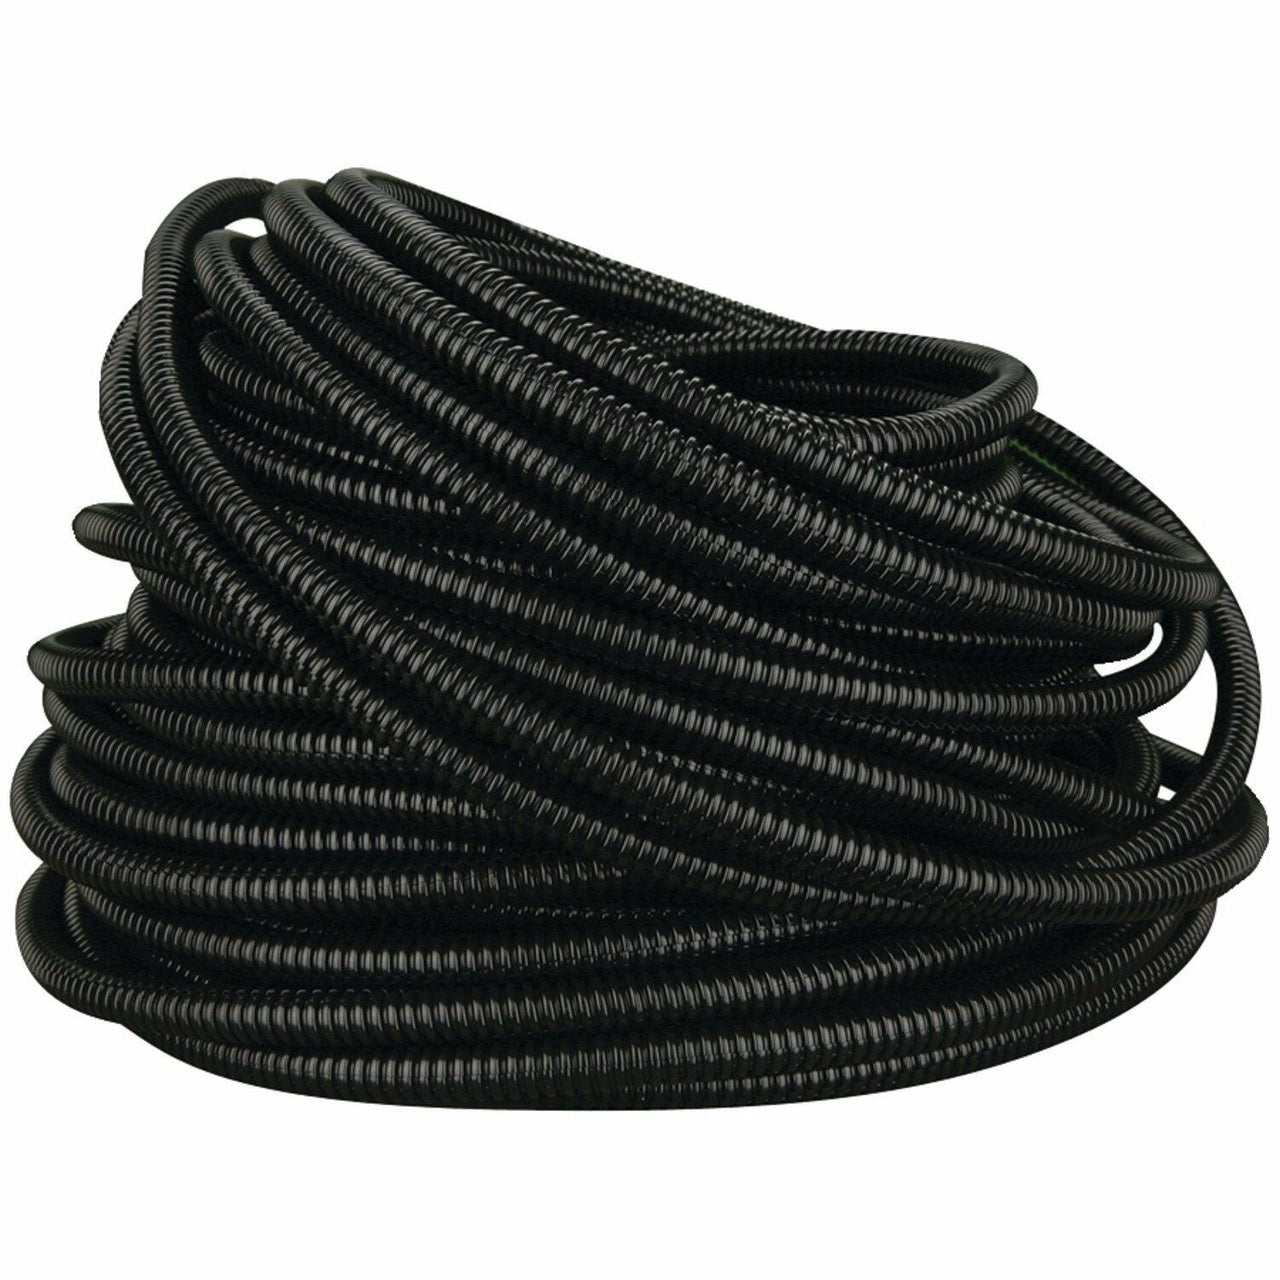 The Install Bay SLT14 50' <br/>high quality 1/4" split loom wire tubing 50 feet in black ribbed design